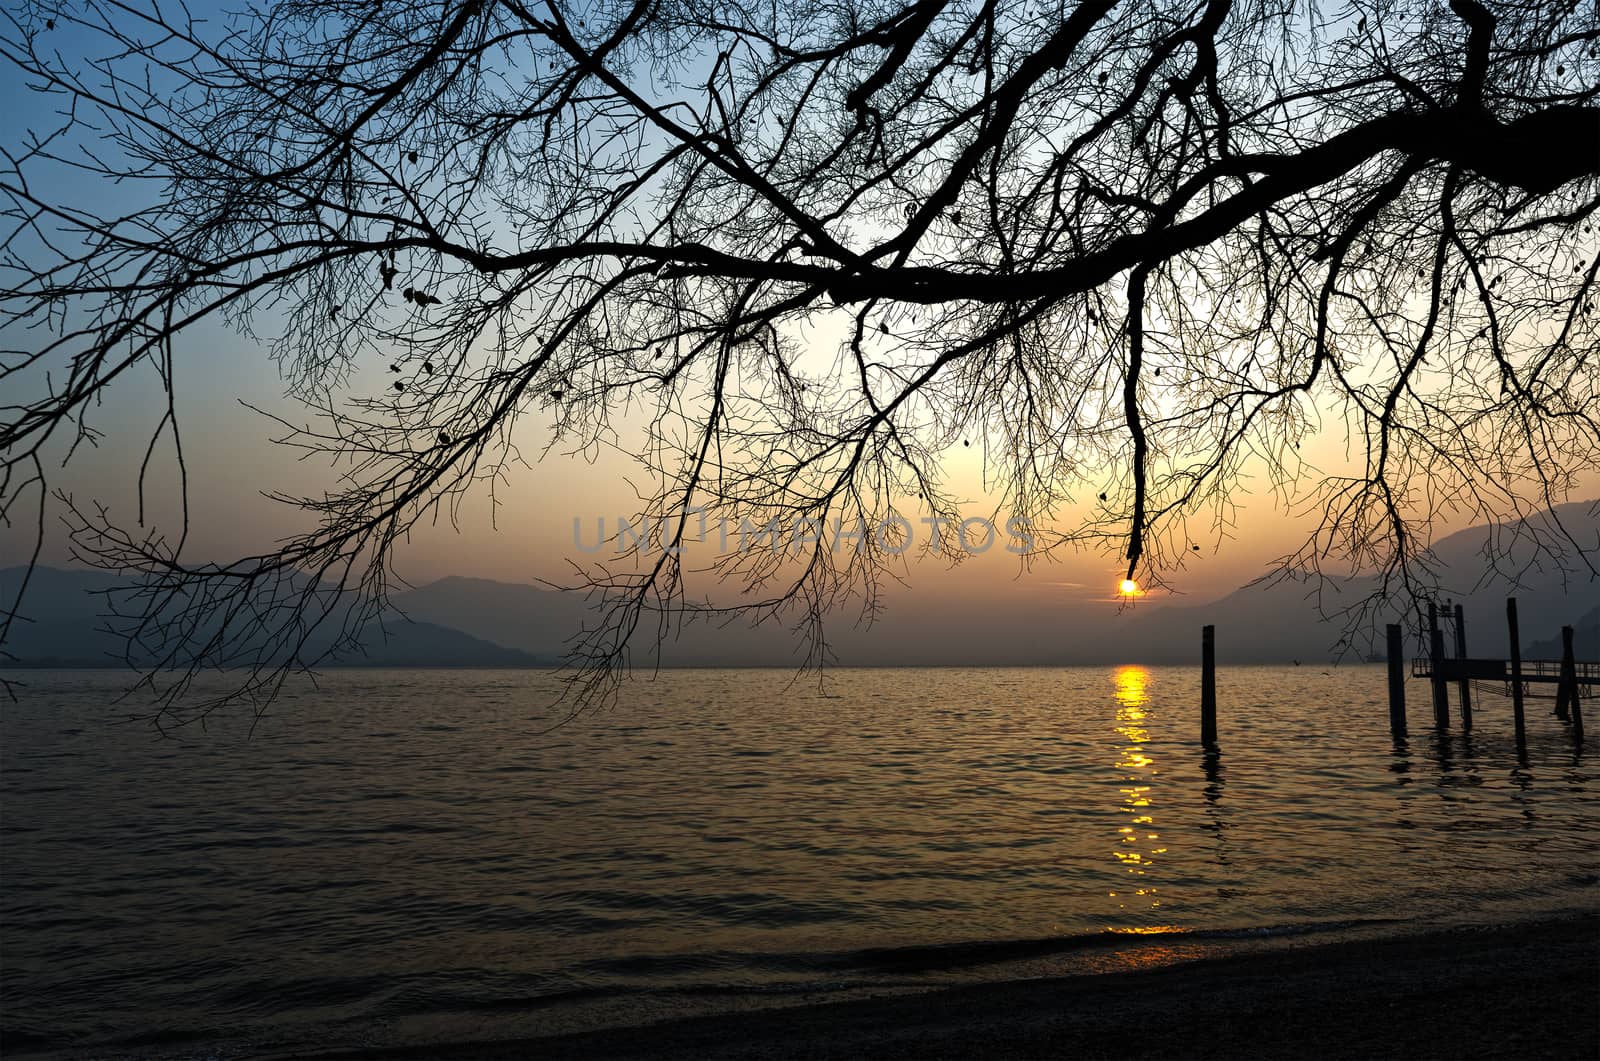 Sunset on the Lake Major, Italy by Mdc1970